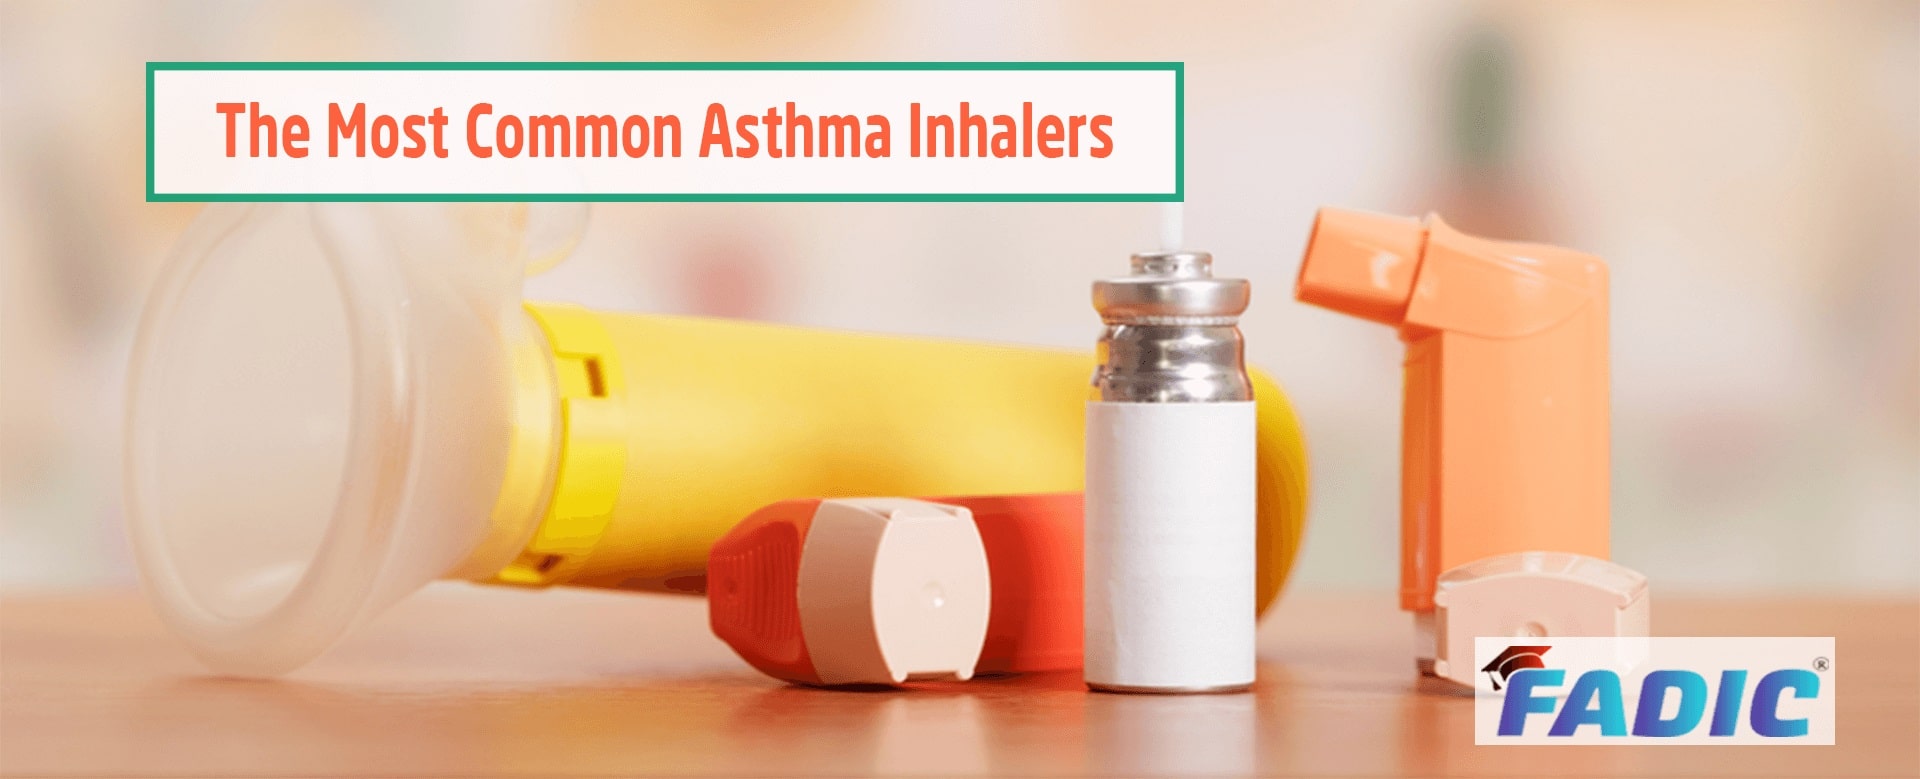 Asthma Medications Commonly Used Inhalers Nebulizers